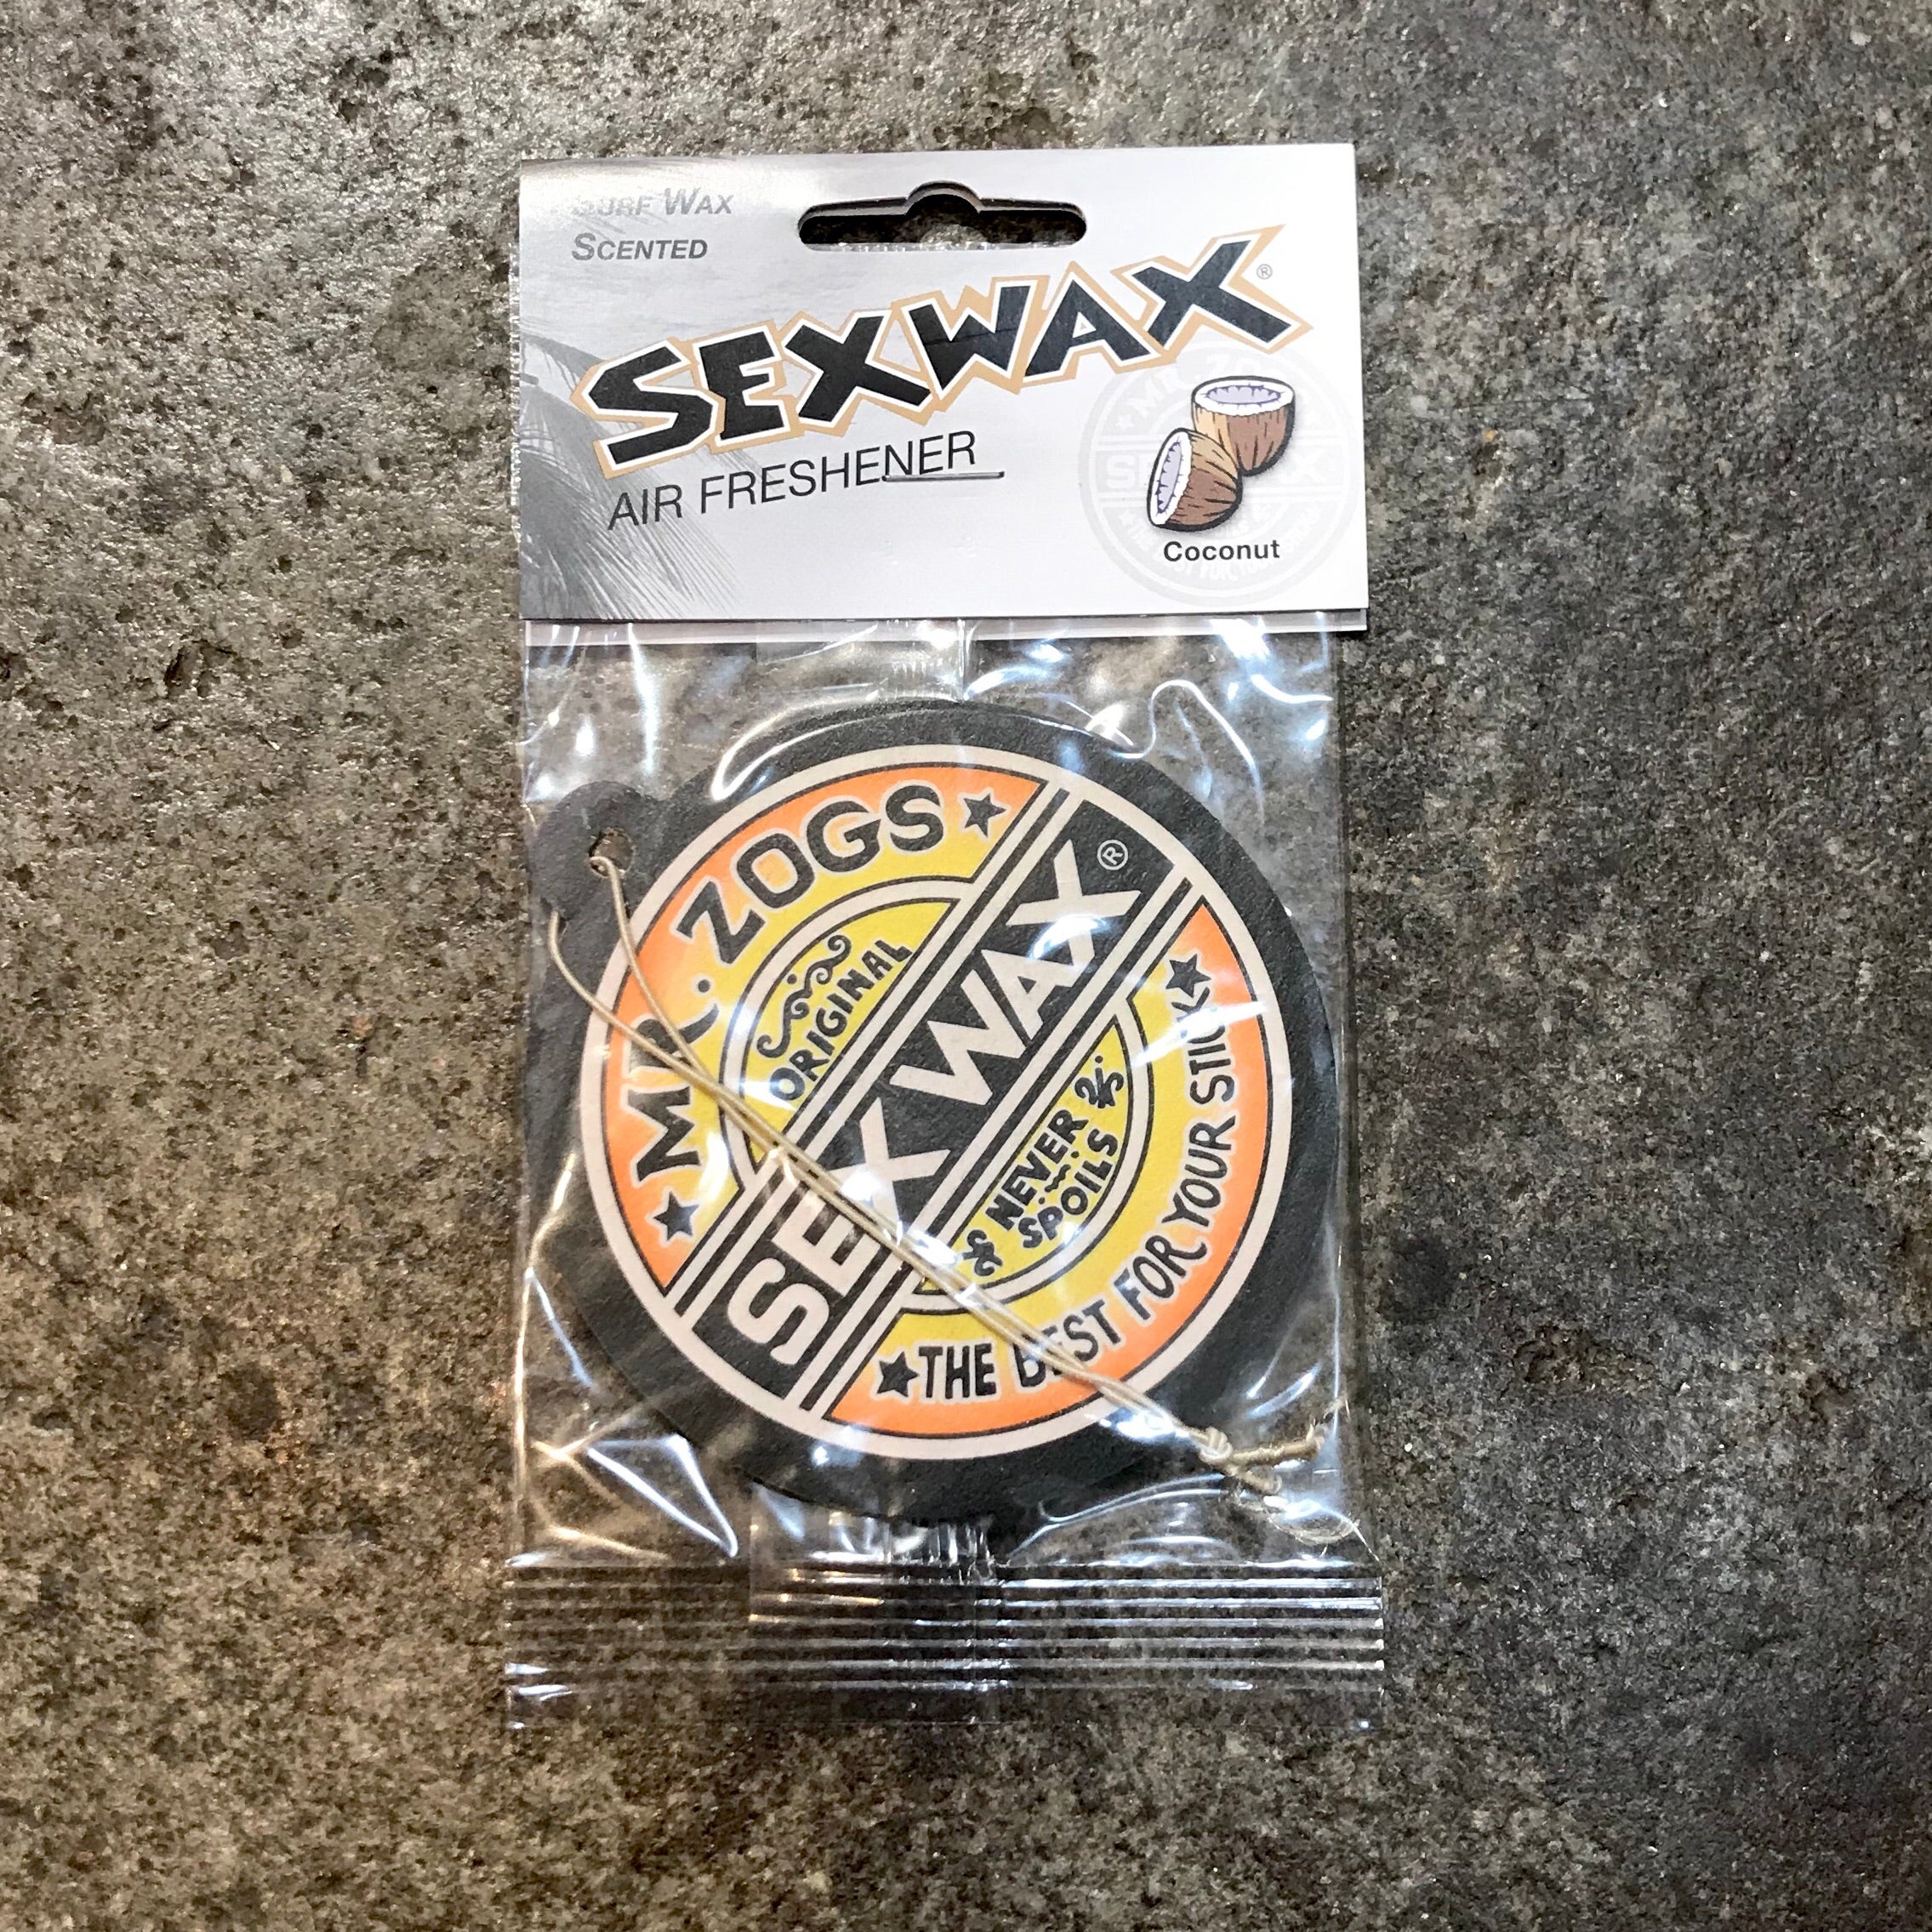 MR ZOGS SEX WAX AIR FRESHENER AT KISS SURF STORE IN CAPE TOWN – KEEP IT  SIMPLE SURF